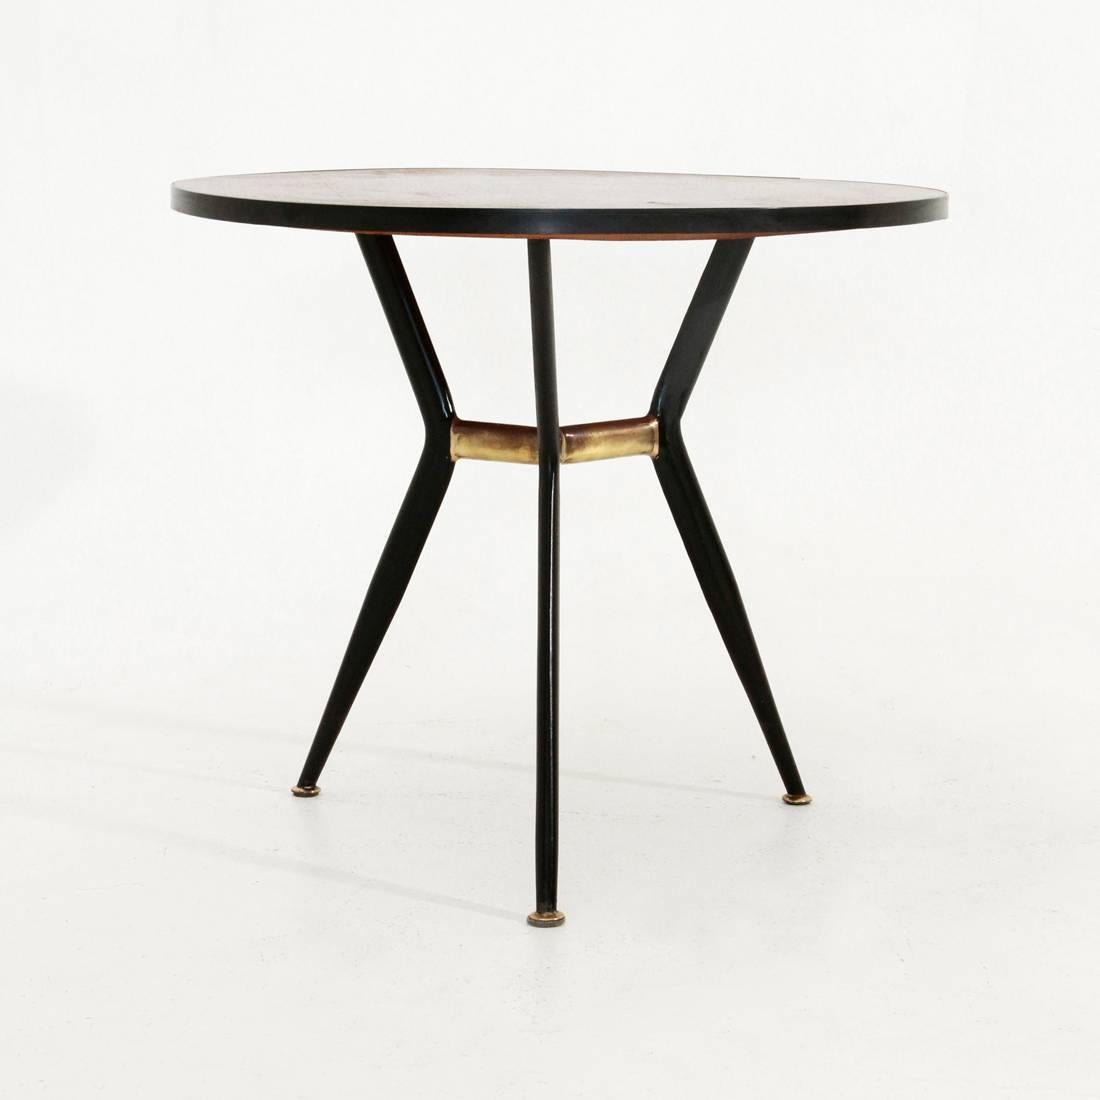 Italian coffee table from the 1960s.
Structure in black painted metal and brass.
Wood veneer top with black border.
Good general conditions, some signs on the top.

Dimensions: Diameter 60 cm, height 51 cm.